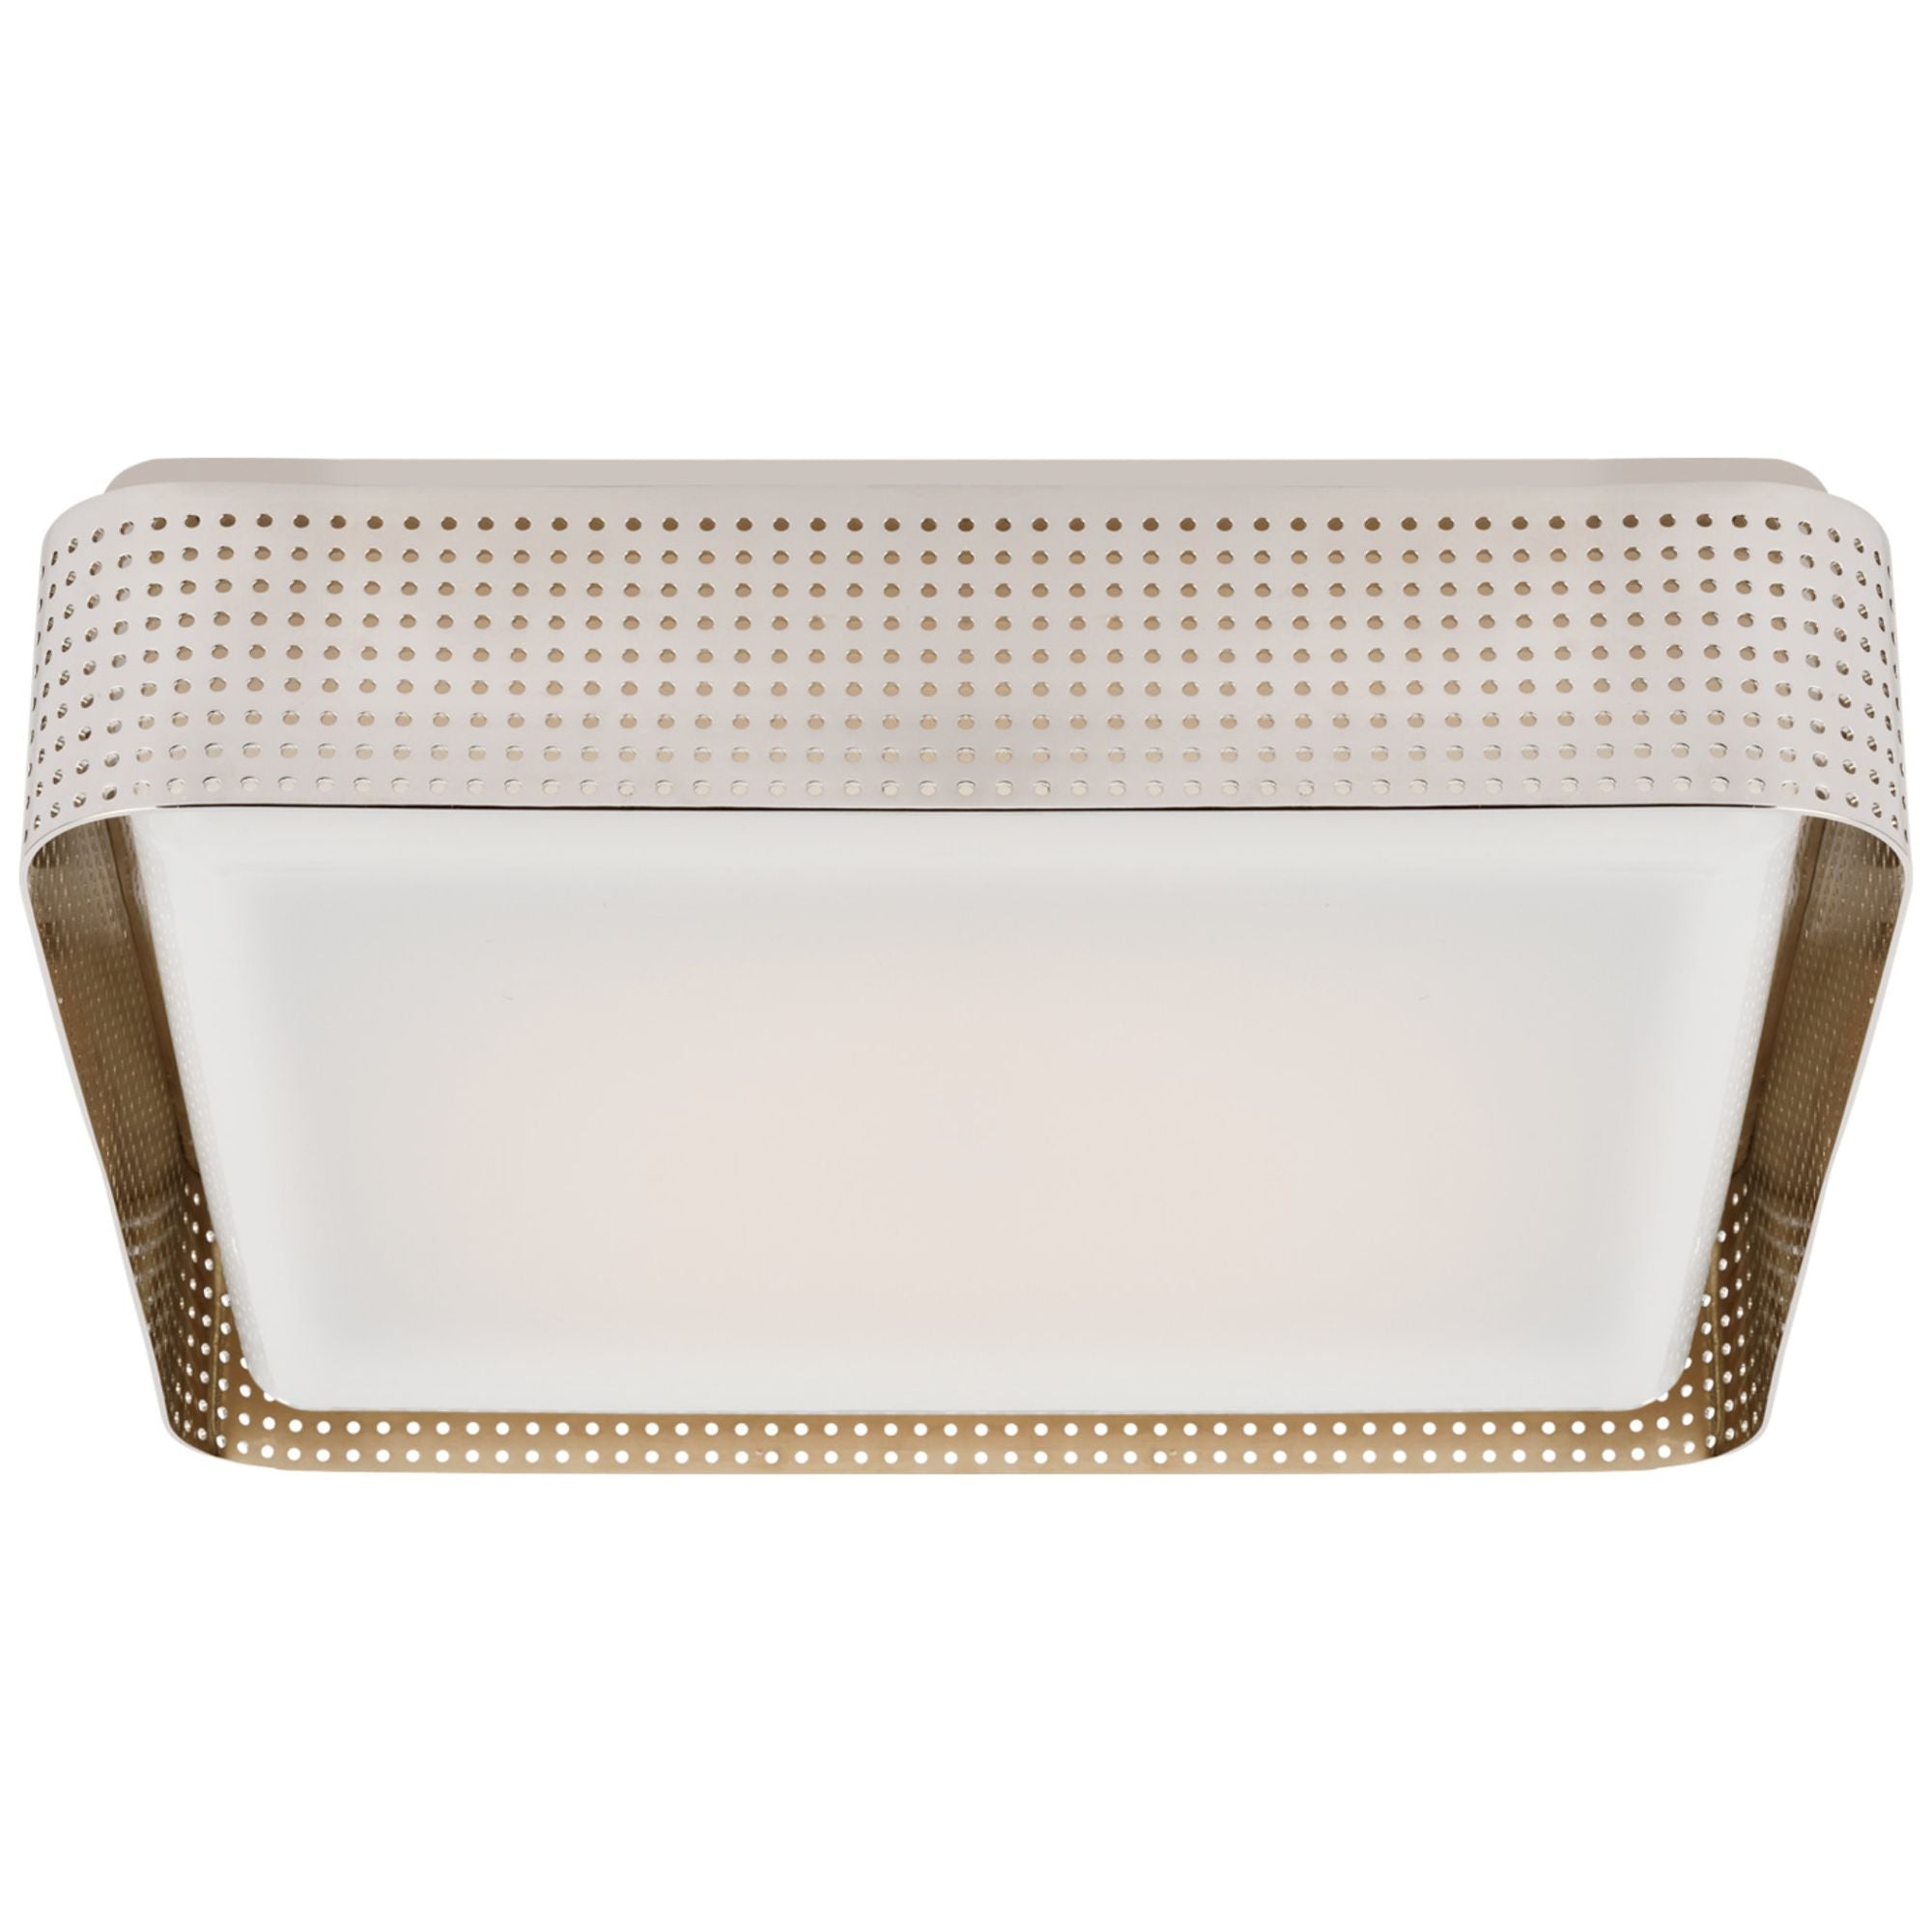 Kelly Wearstler Precision 16" Square Flush Mount in Polished Nickel with White Glass